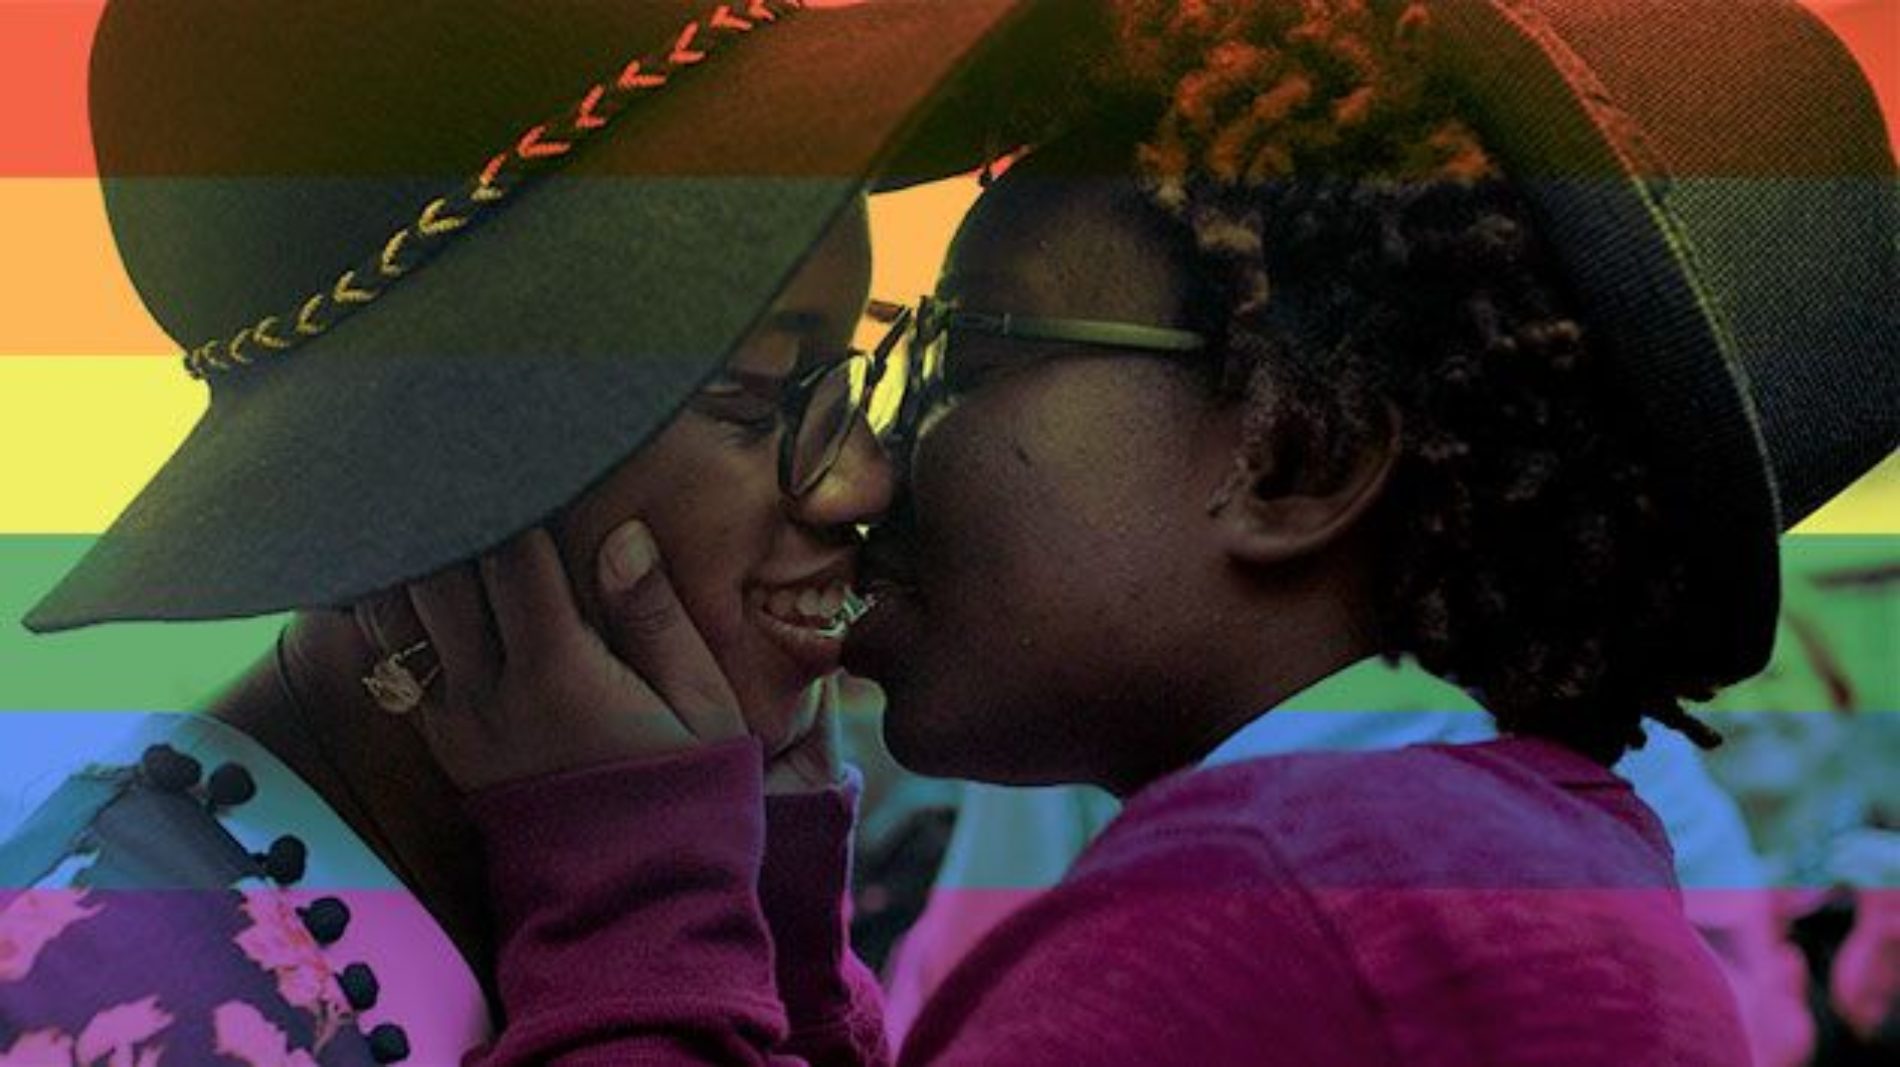 The Piece About Coming Out And The African LGBT